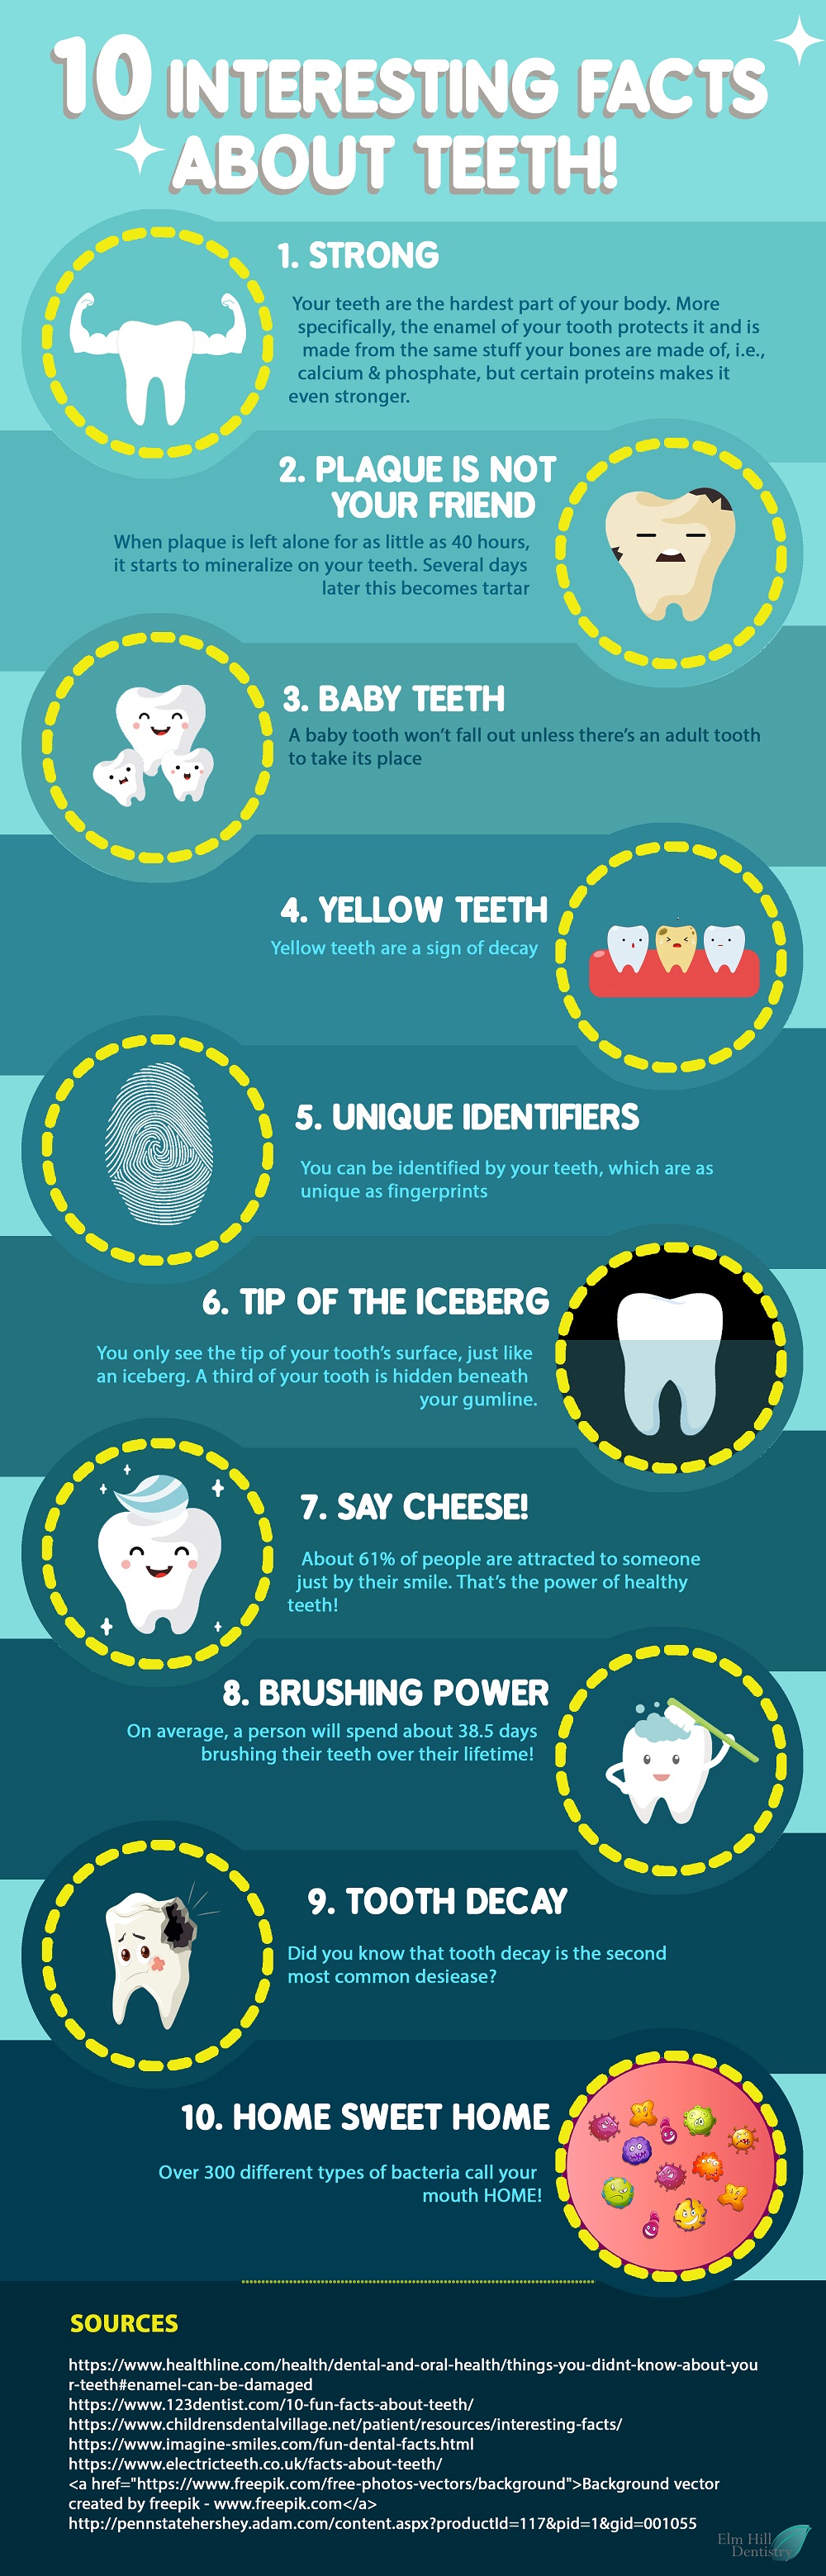 10 Interesting Facts About Teeth Infographic